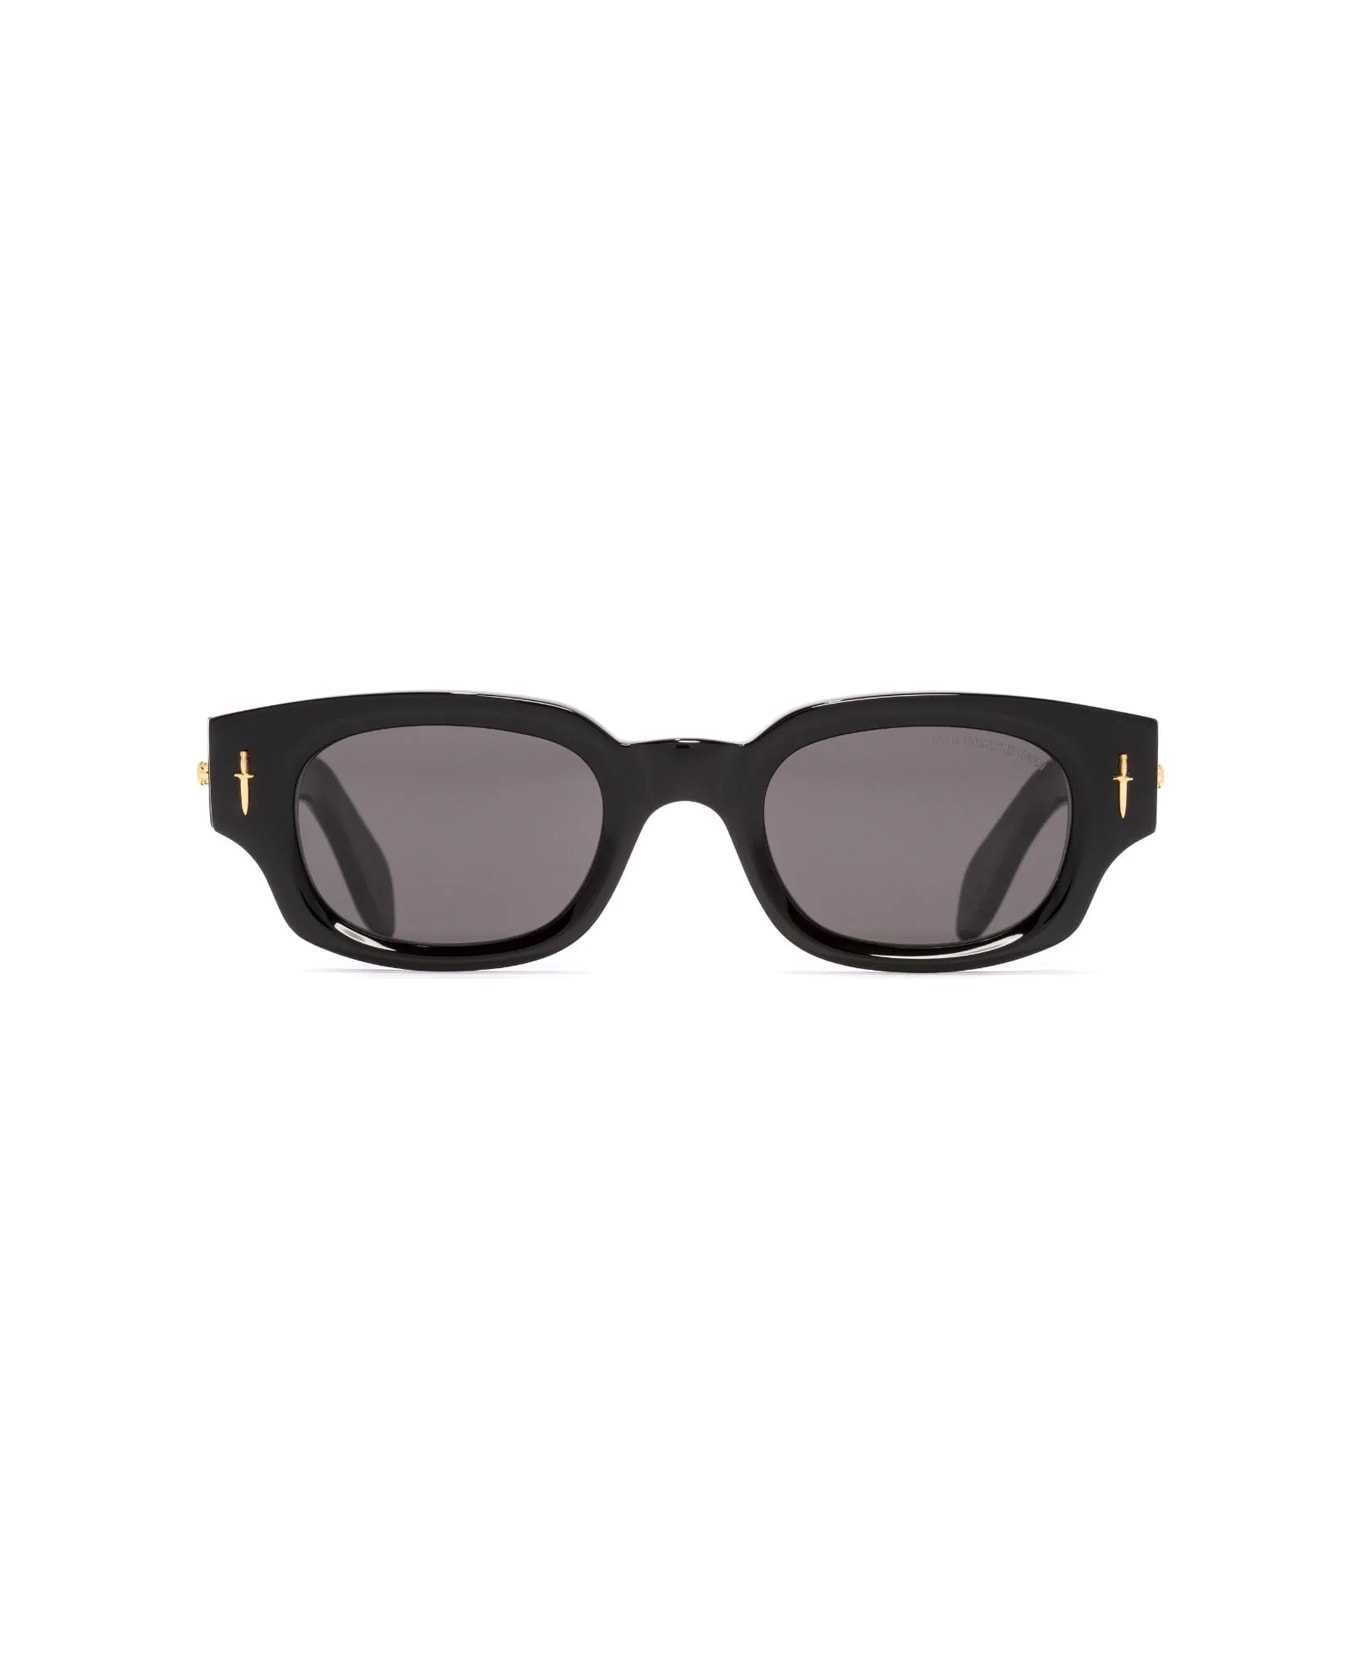 Cutler and Gross Great Frog 004 01 Gold Sunglasses - Nero